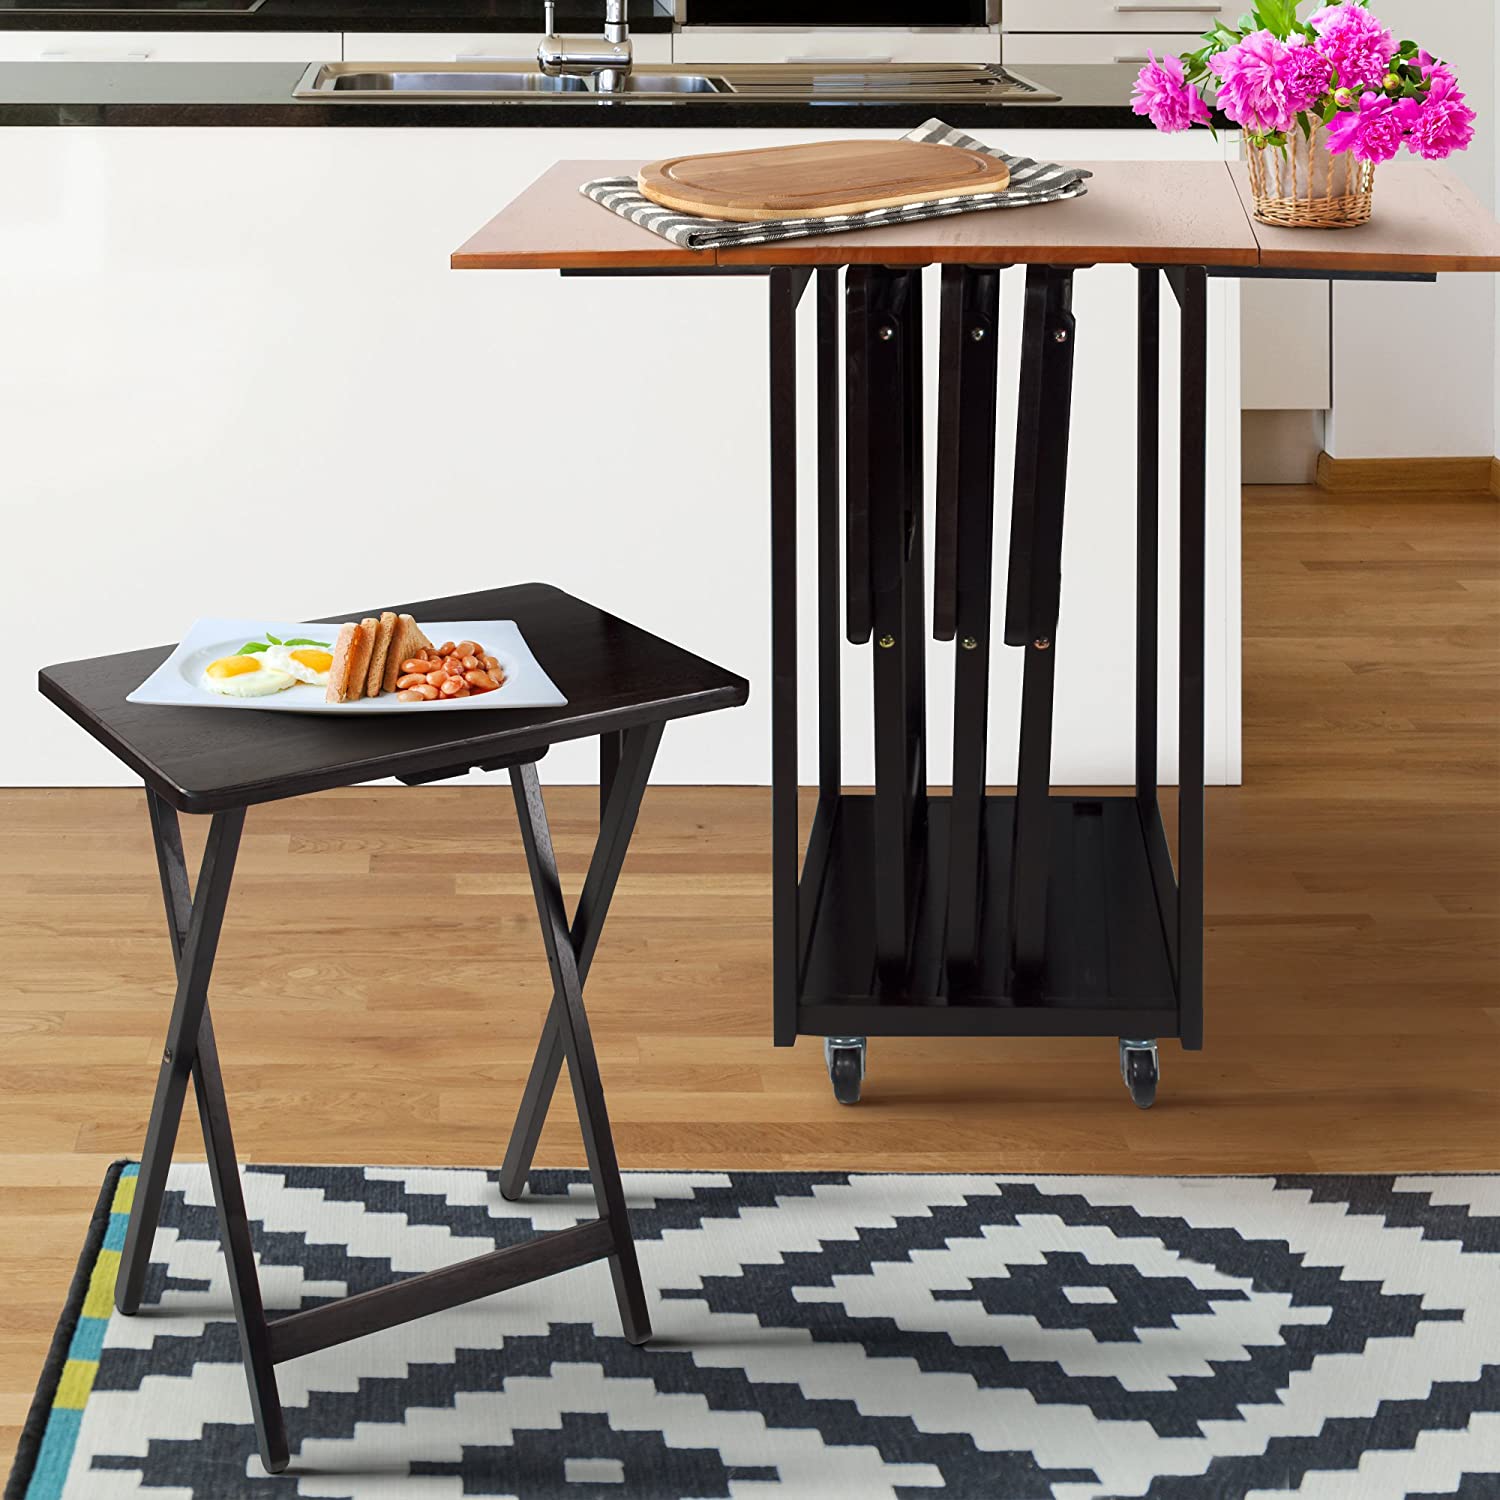 Casual Home Drop Leaf Table with TV Trays